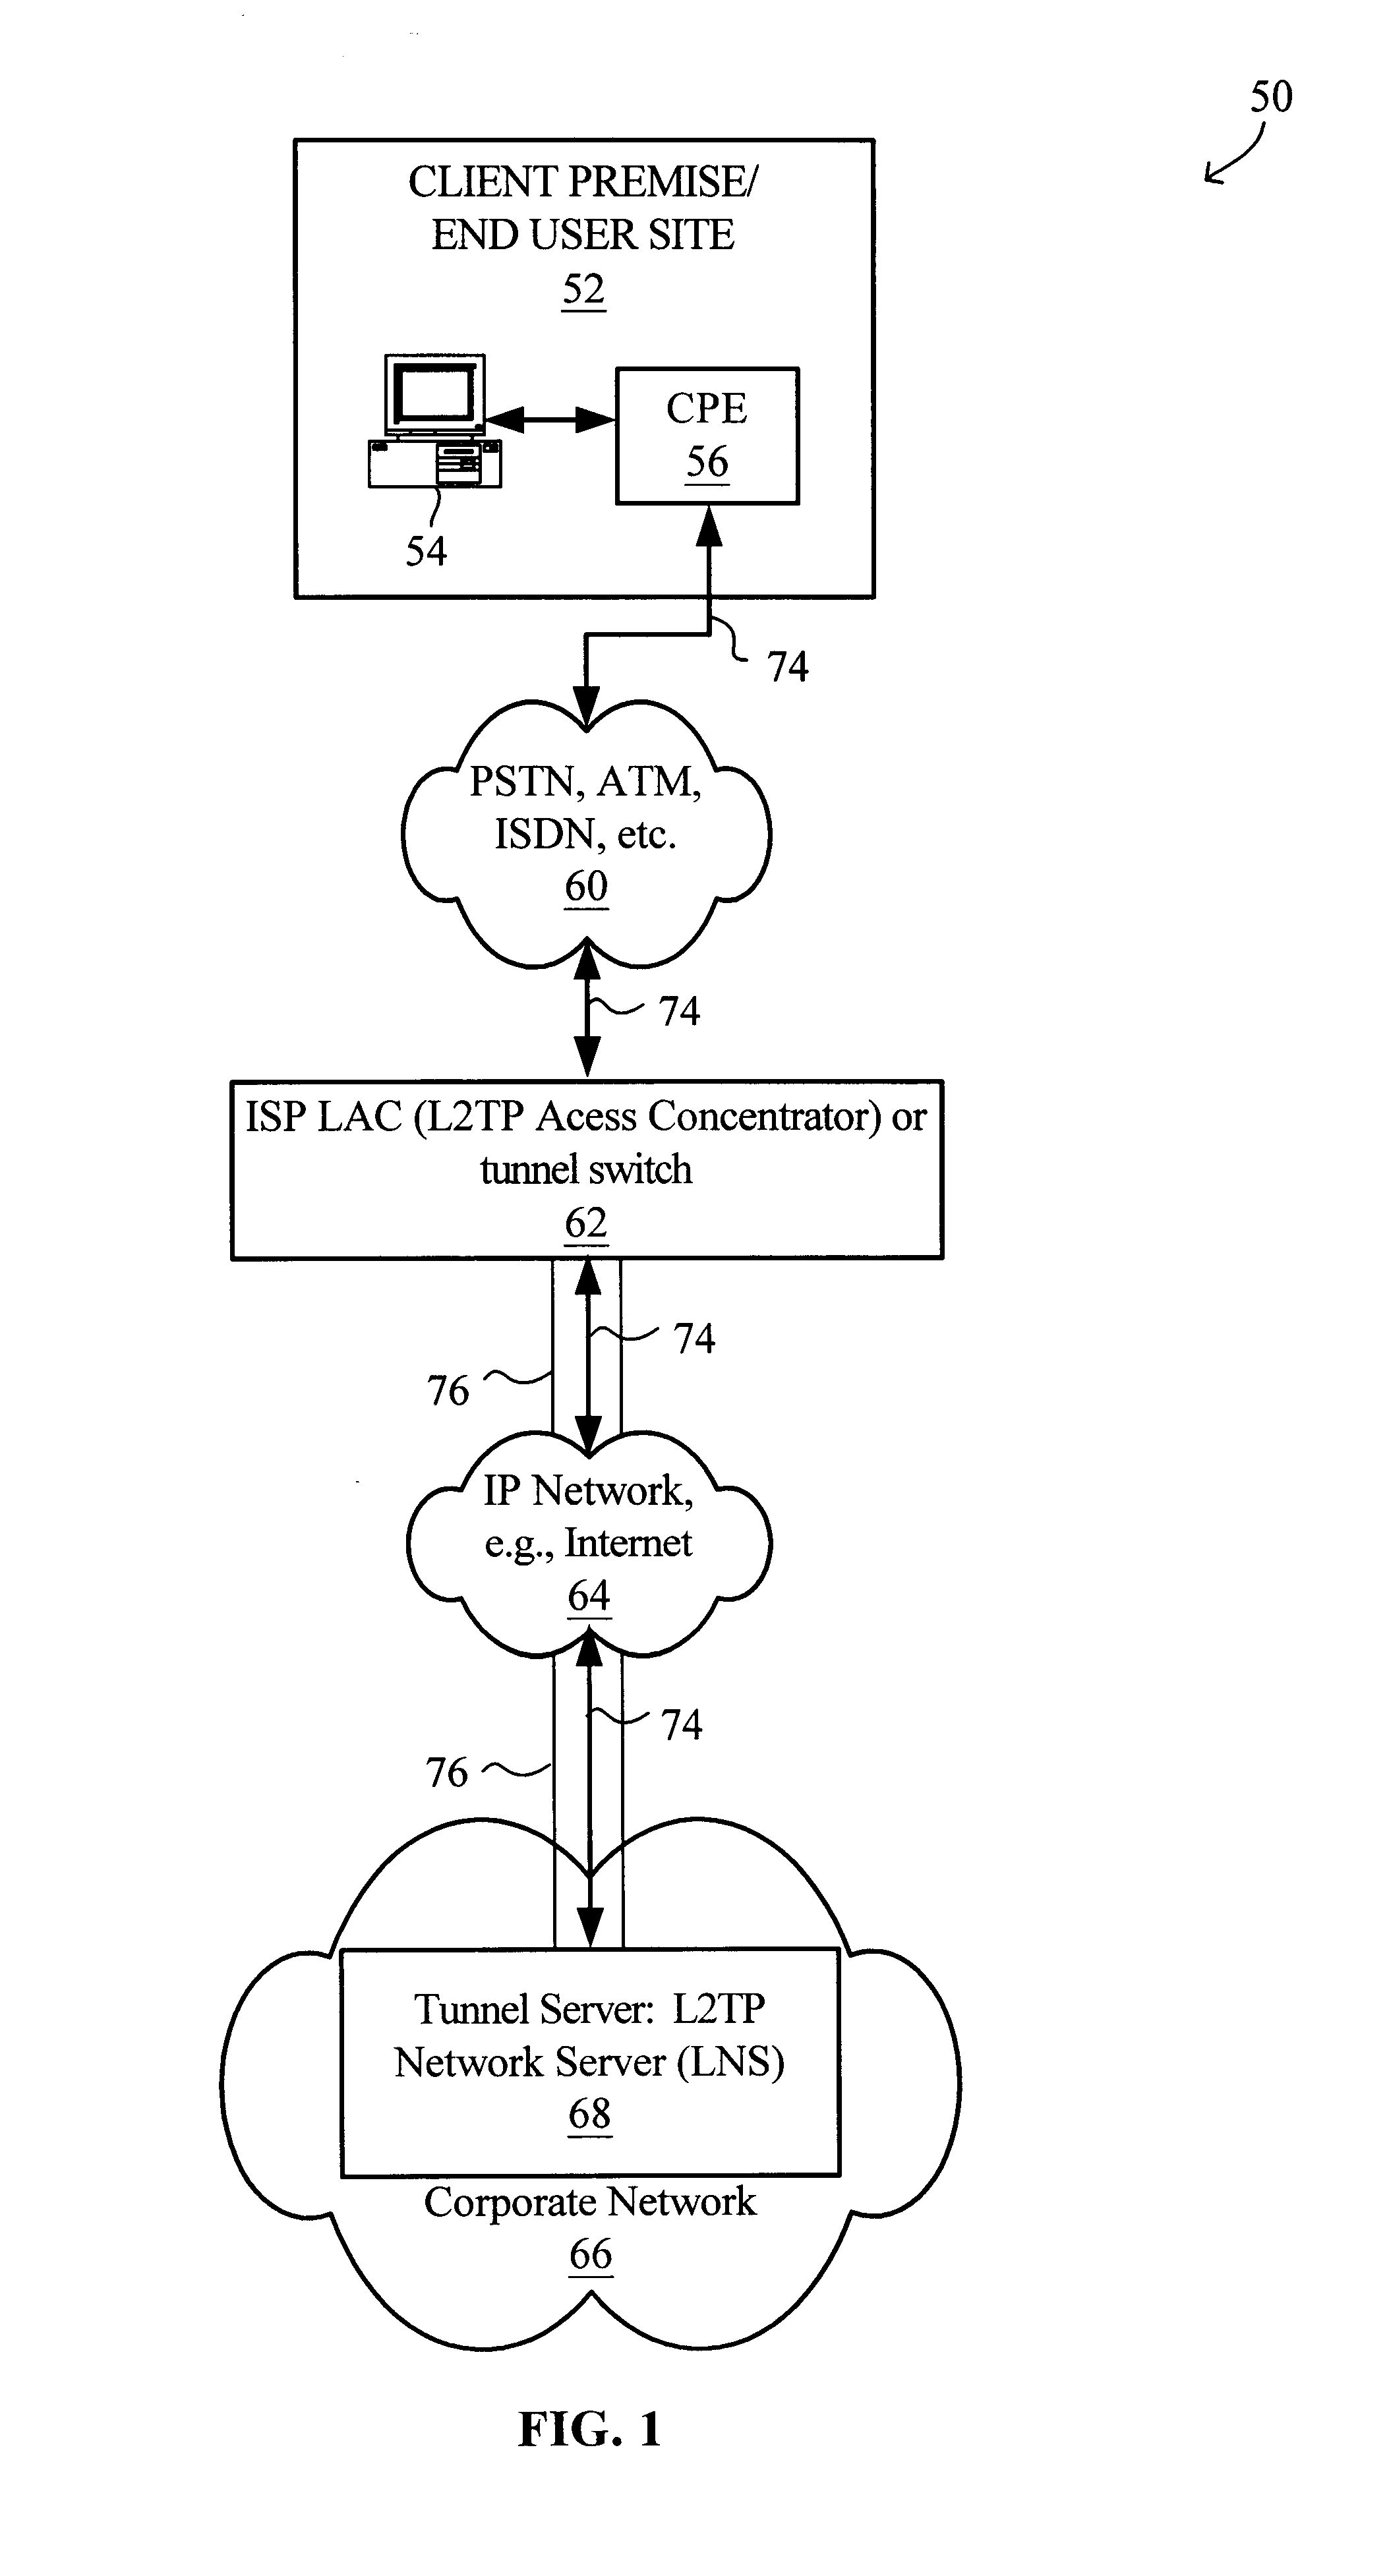 Virtual L2TP/VPN tunnel network and spanning tree-based method for discovery of L2TP/VPN tunnels and other layer-2 services